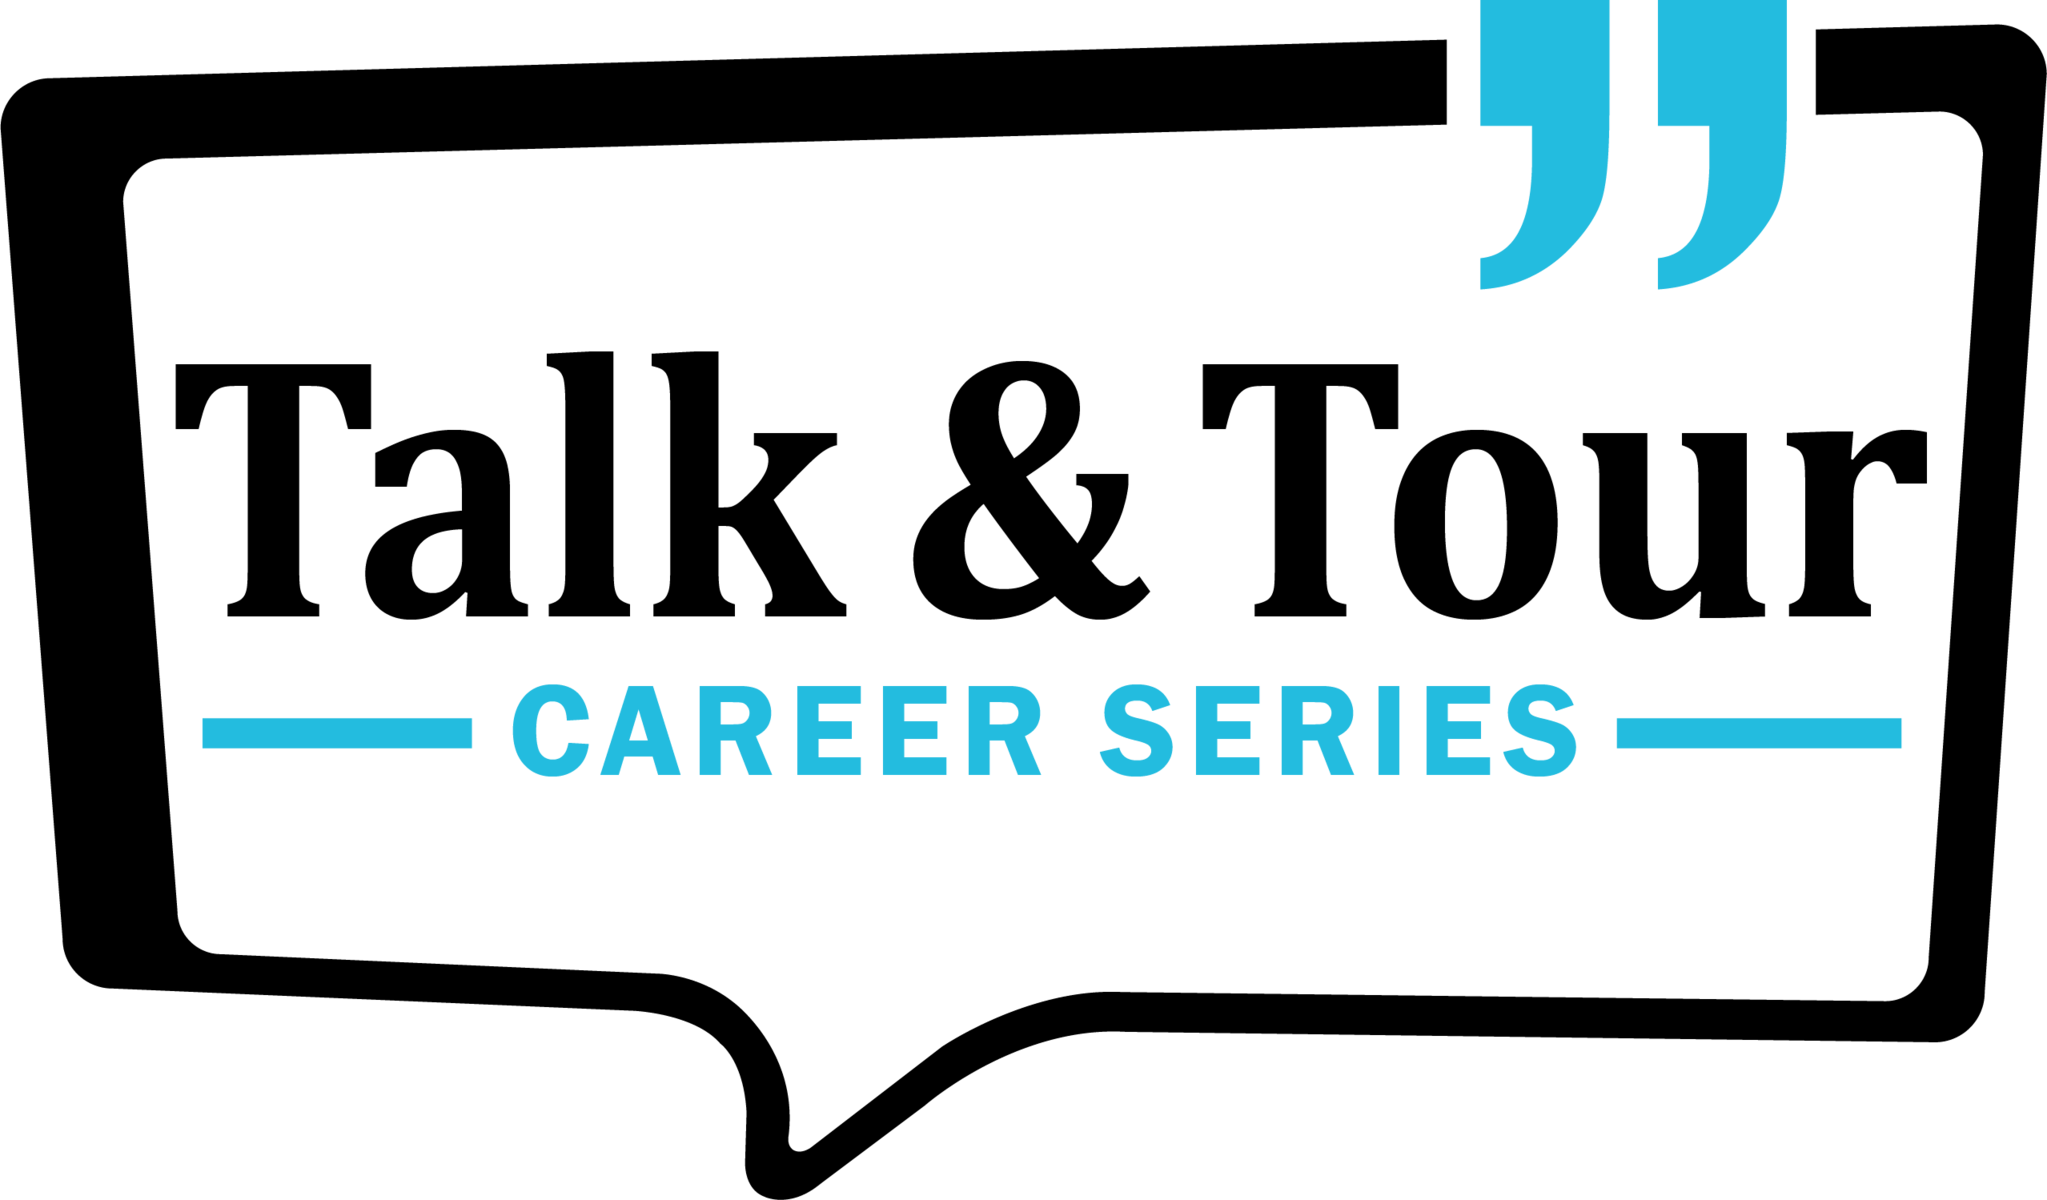 Talk and Tour Career Series graphic